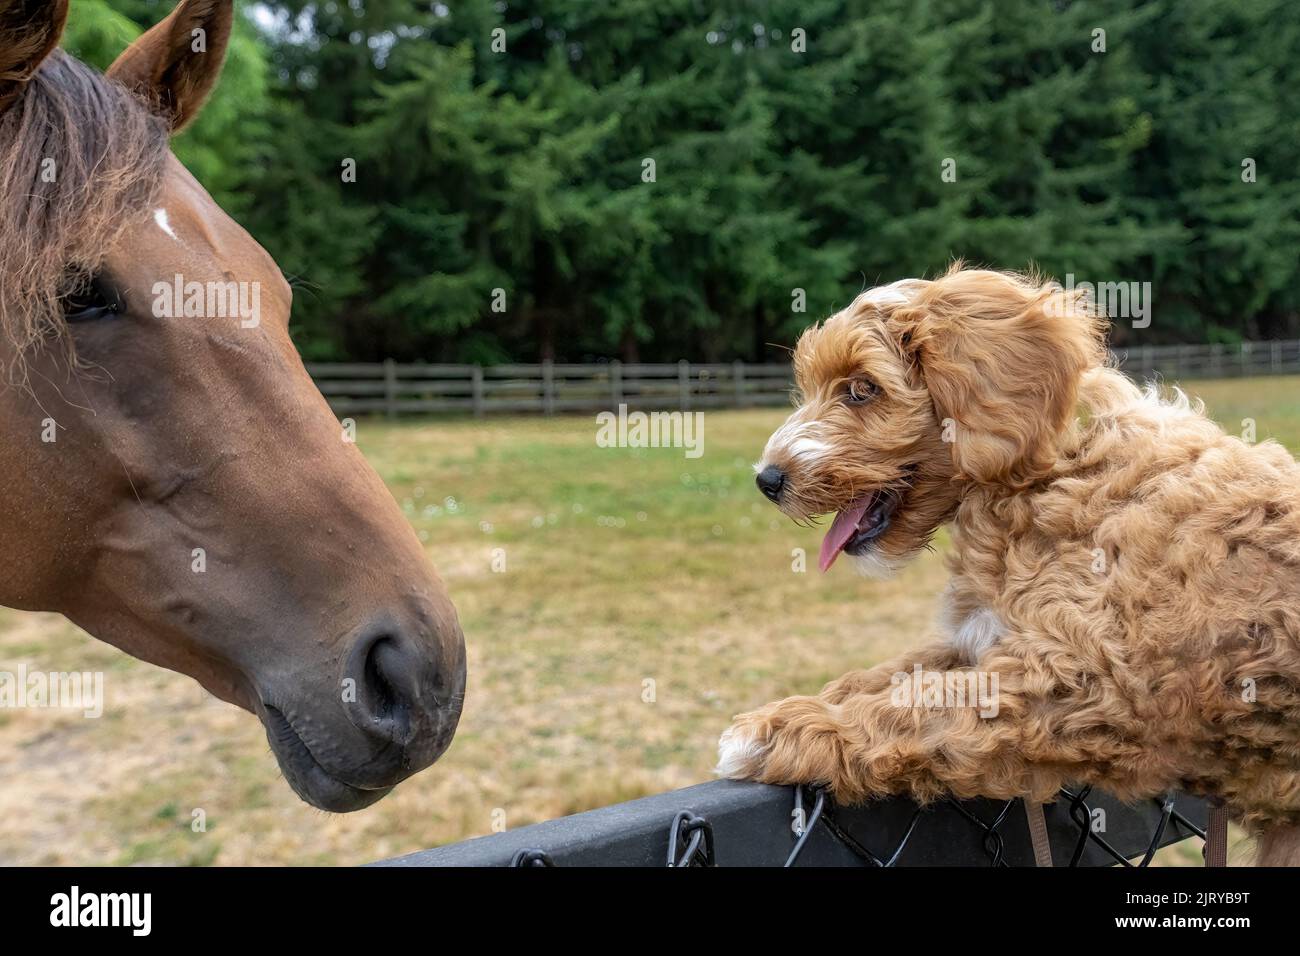 Issaquah, Washington, USA.  3-month old Aussiedoodle puppy named 'Bella' being lifted up to greet a horse.  (PR) Stock Photo